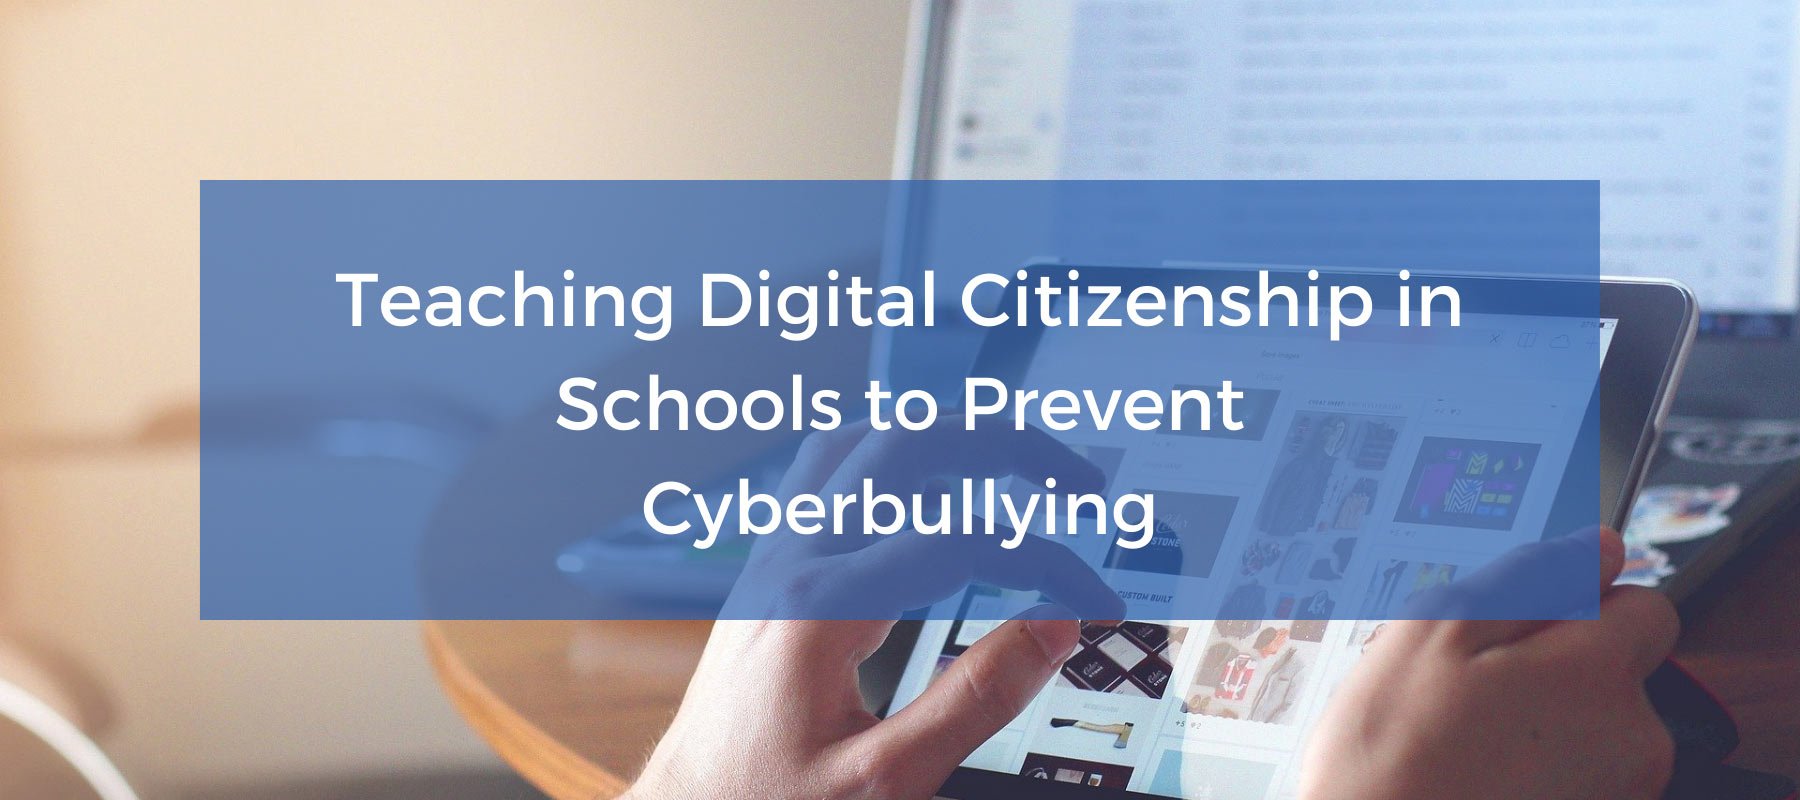 Teaching Digital Citizenship in Schools to Prevent Cyberbullying